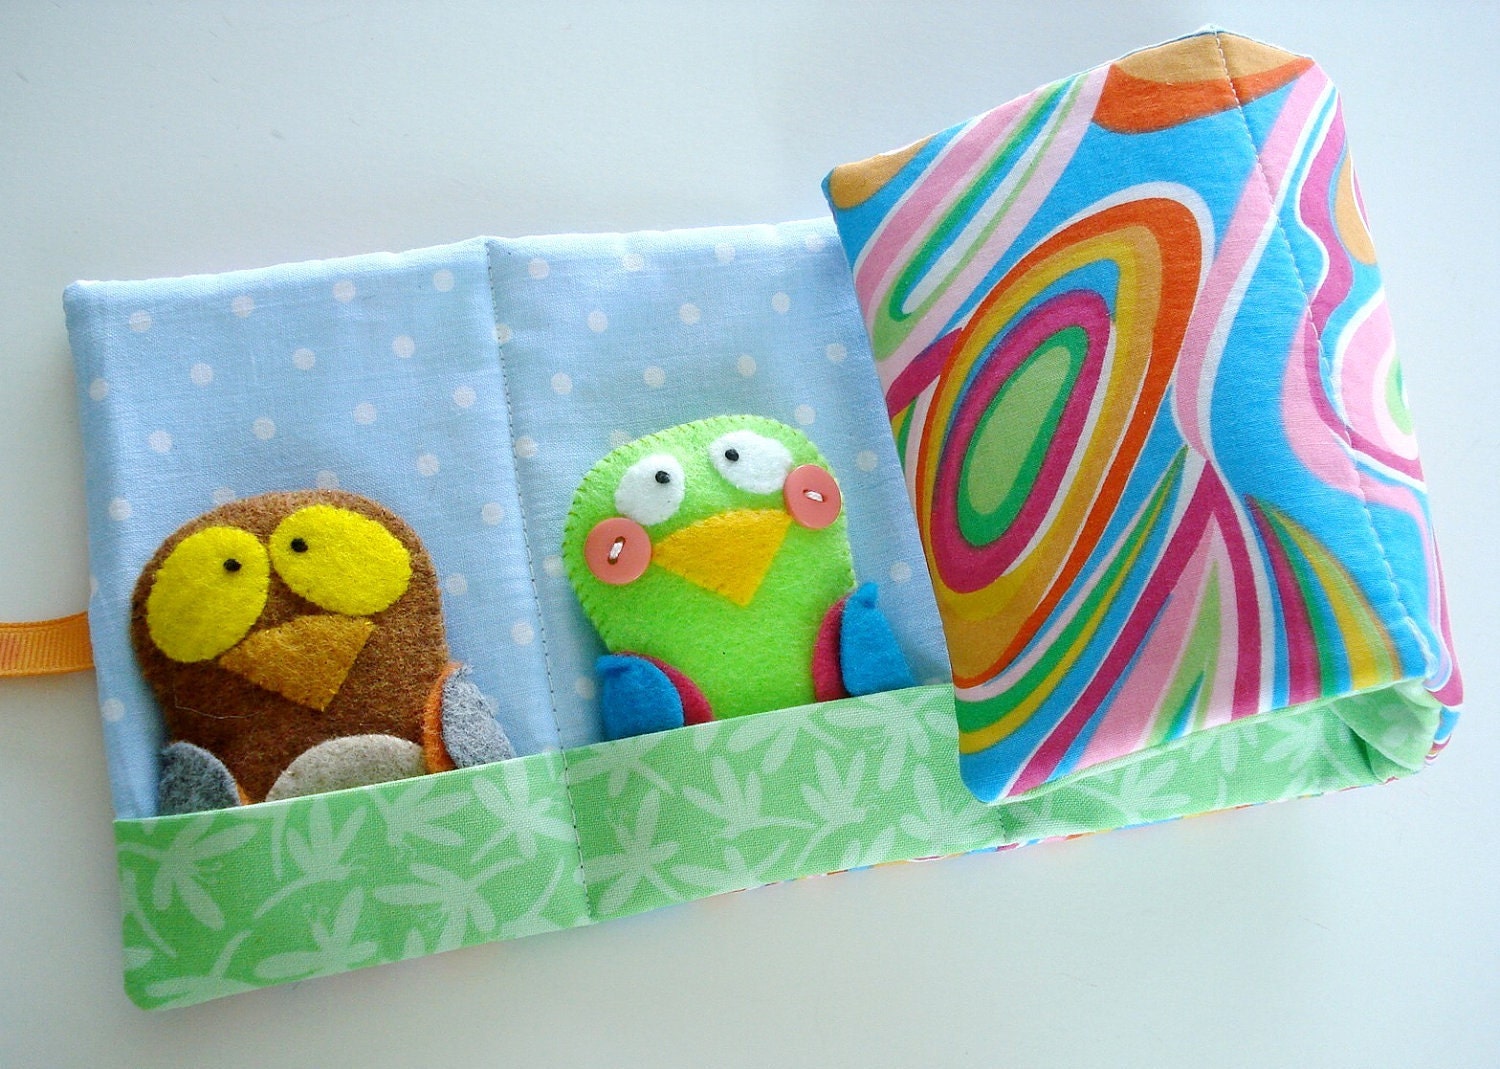 Sheets of felt, scissors, pins, paper templates - sewing set for felt bird.  How to make a handmade toy Stock Illustration by ©OnlyZoia #131570612